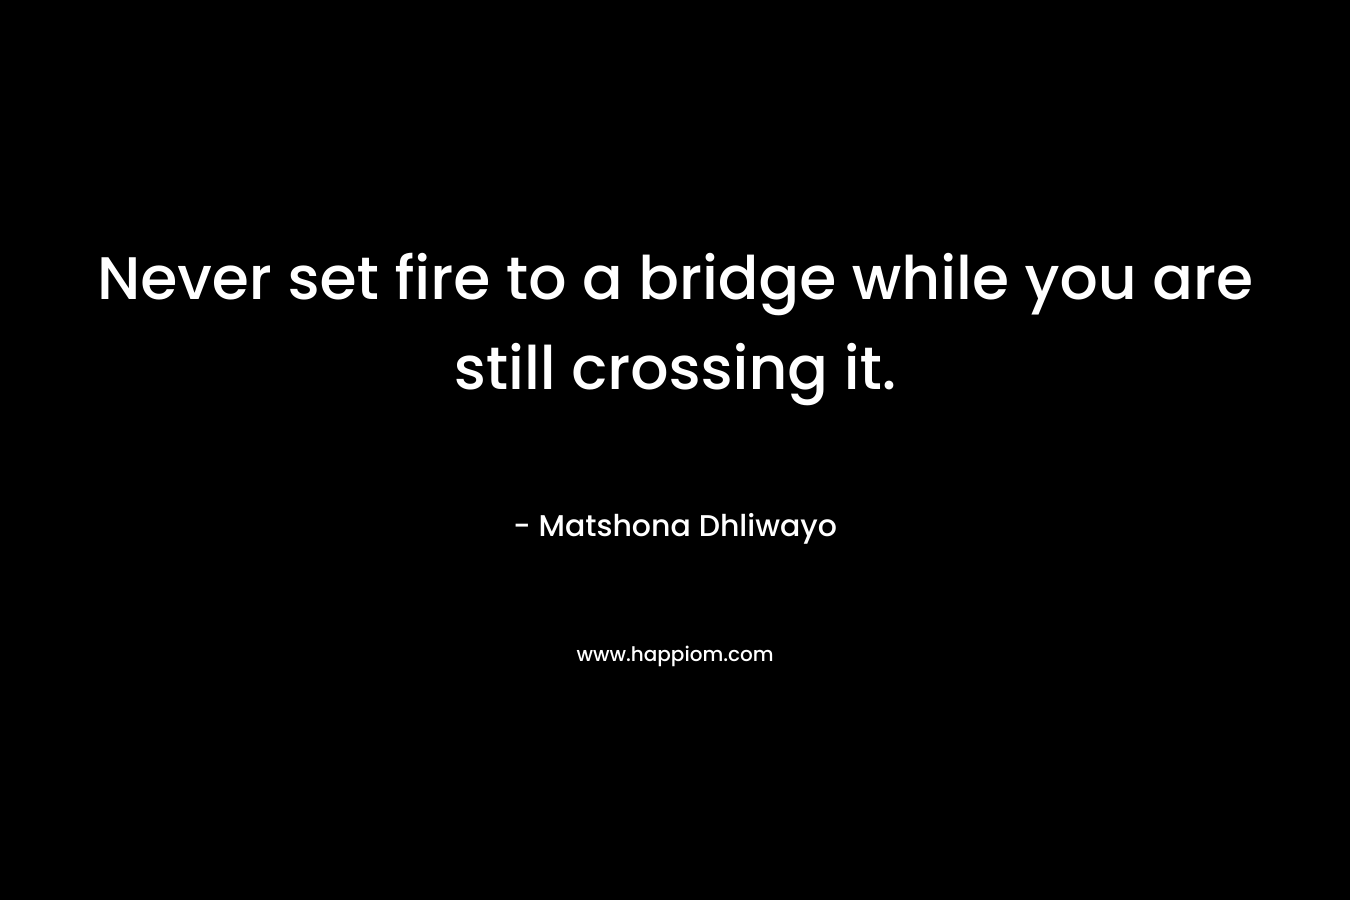 Never set fire to a bridge while you are still crossing it.